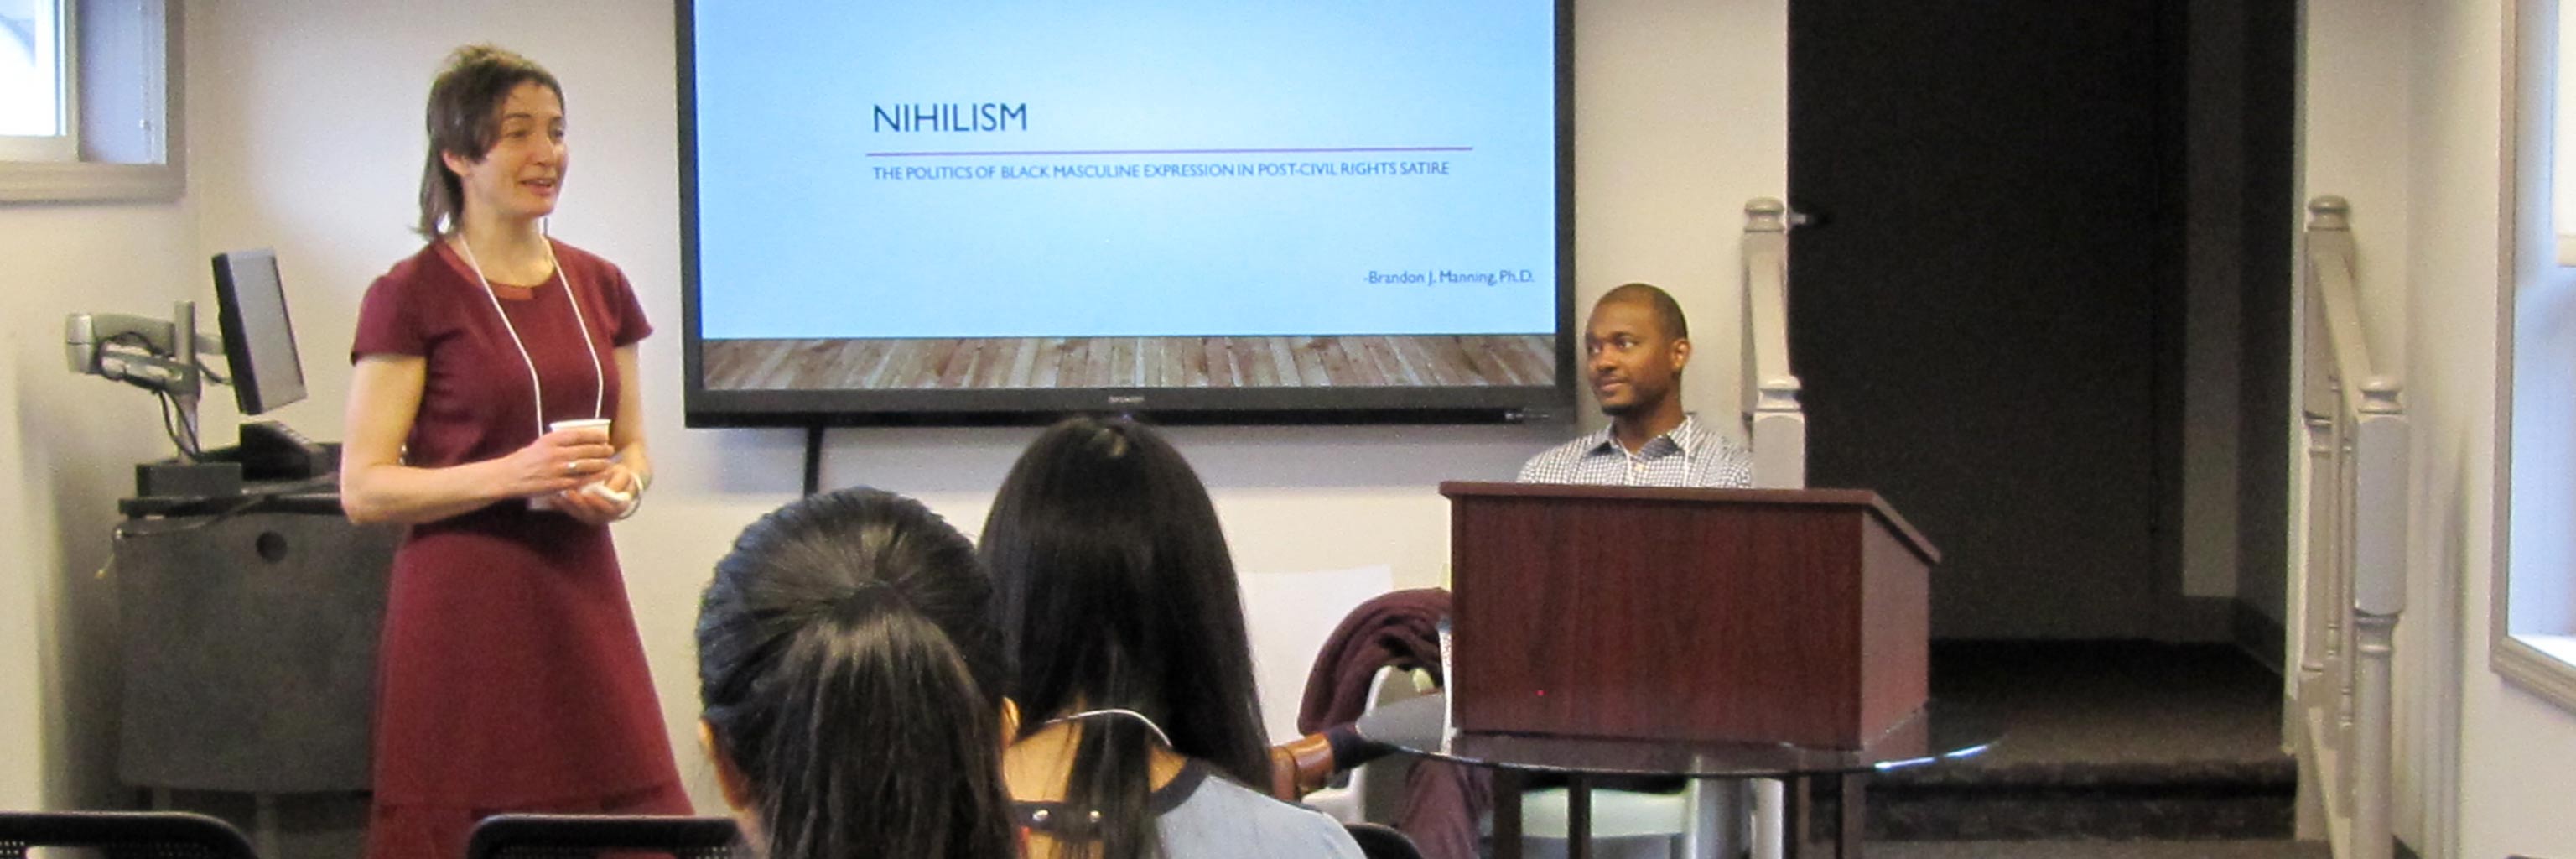 Student presents a PowerPoint slide defining "nihilism" to her class